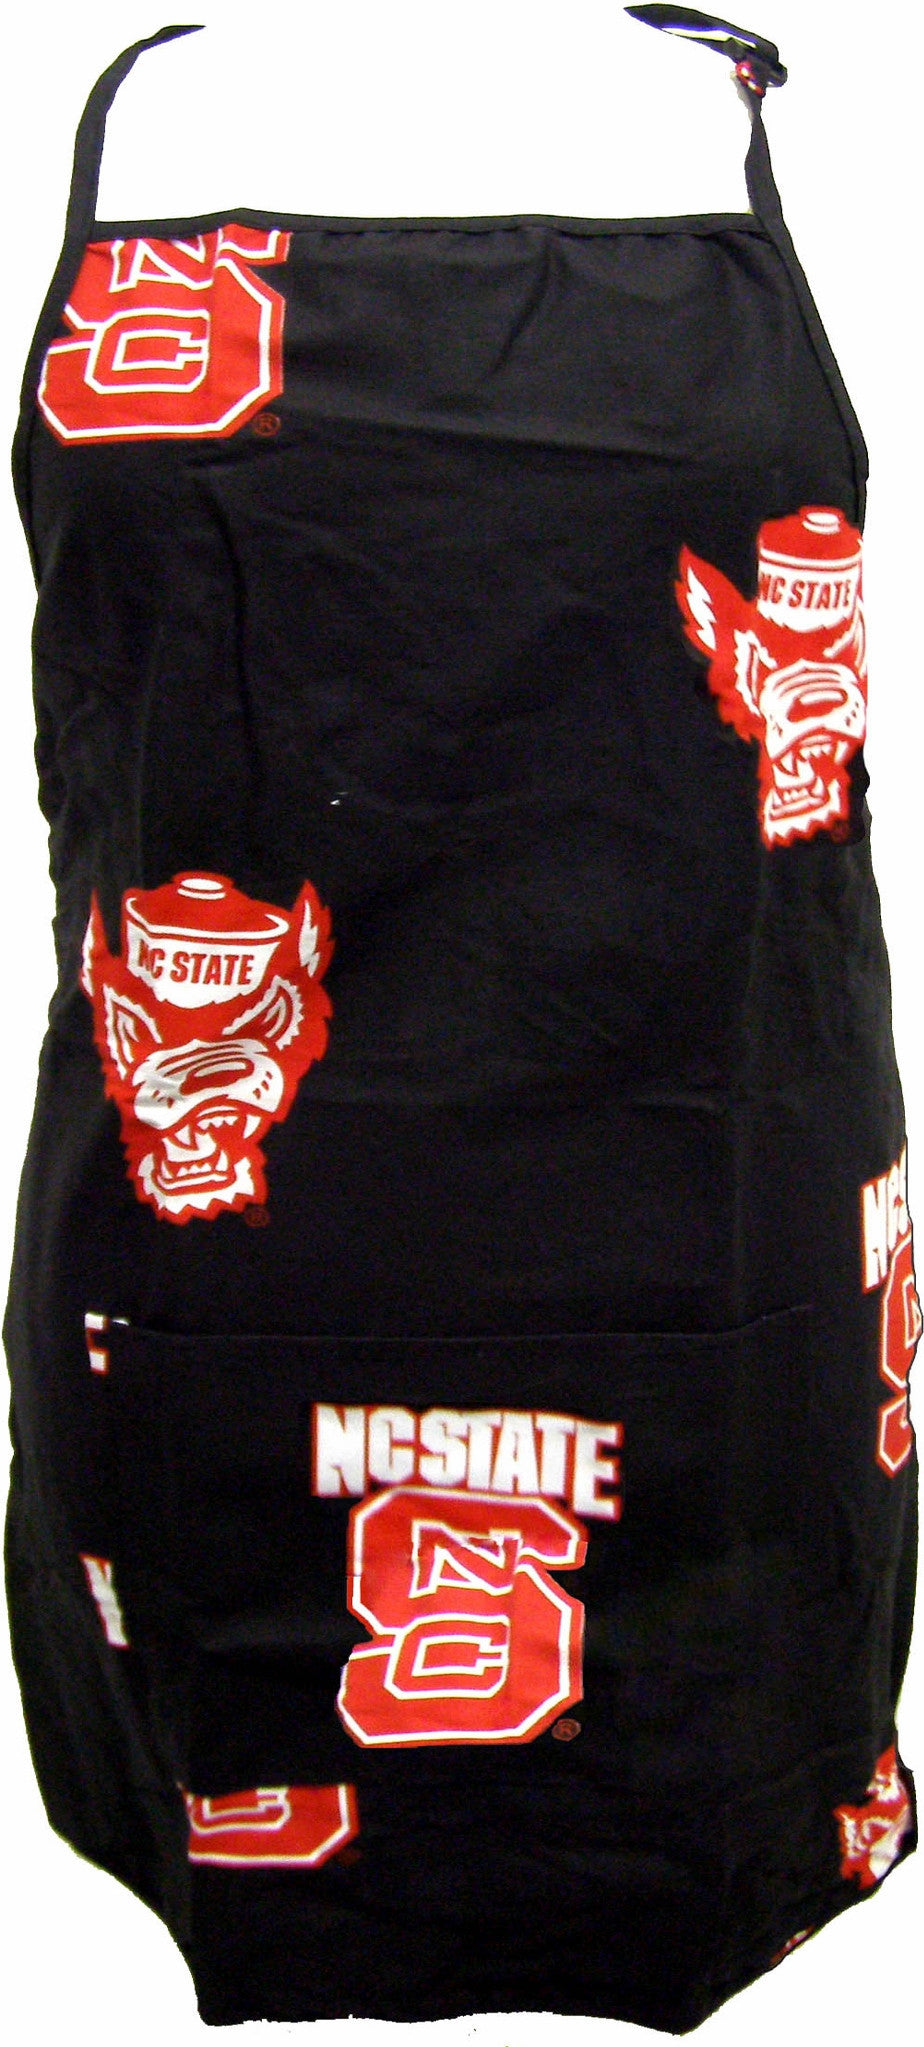 Nc State Apron 26"x35" With 9" Pocket - Ncsapr By College Covers